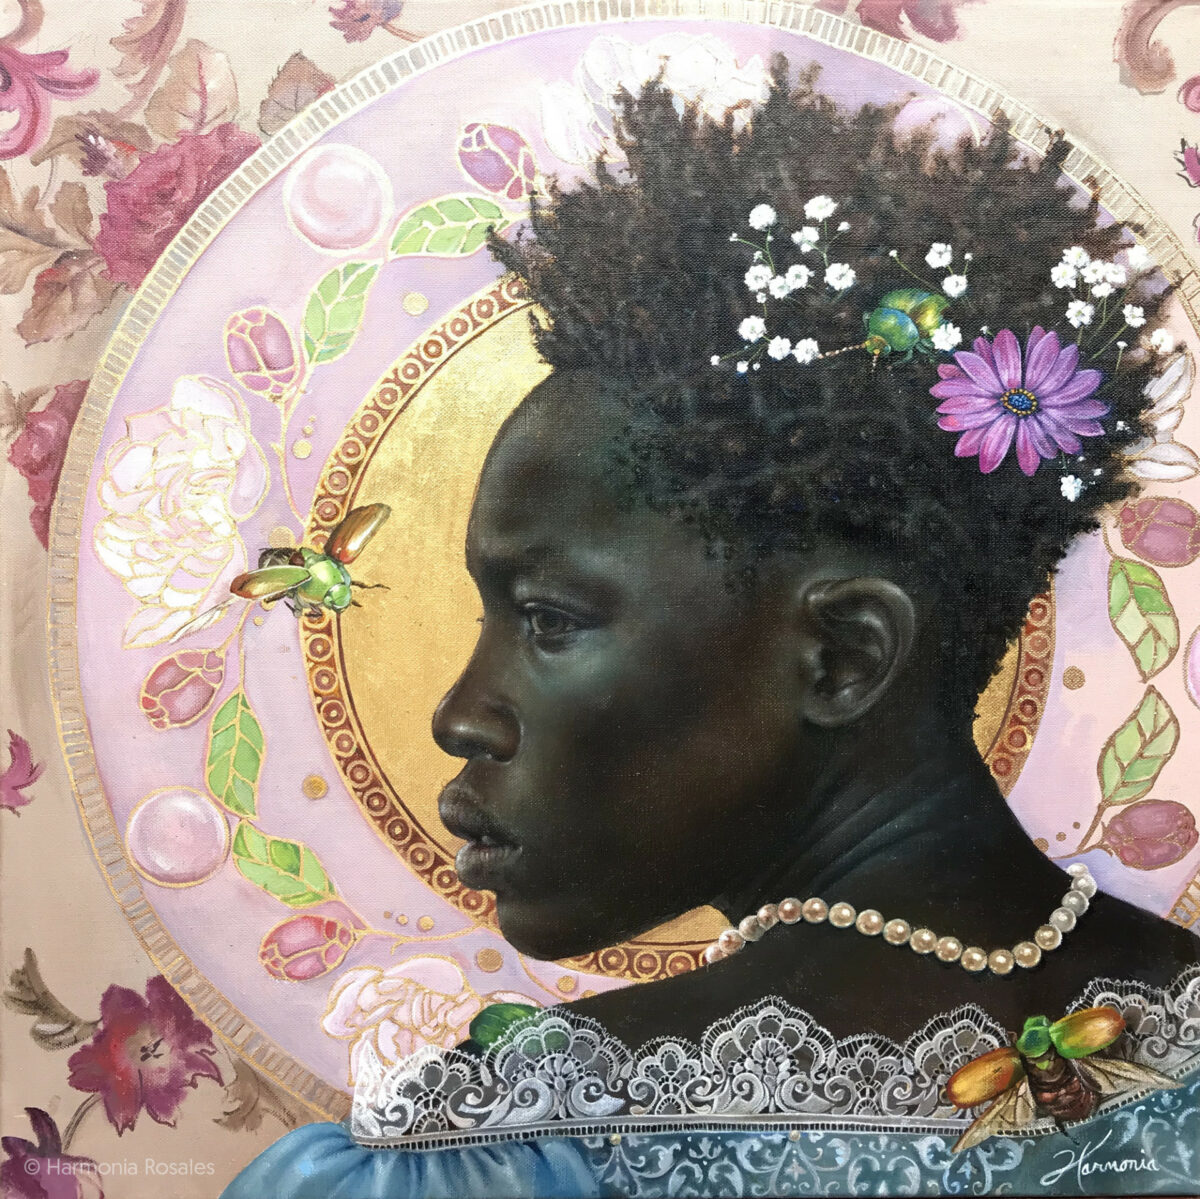 Powerful Portraits Of Black Figures Painted In The Classical European Style By Harmonia Rosales 6